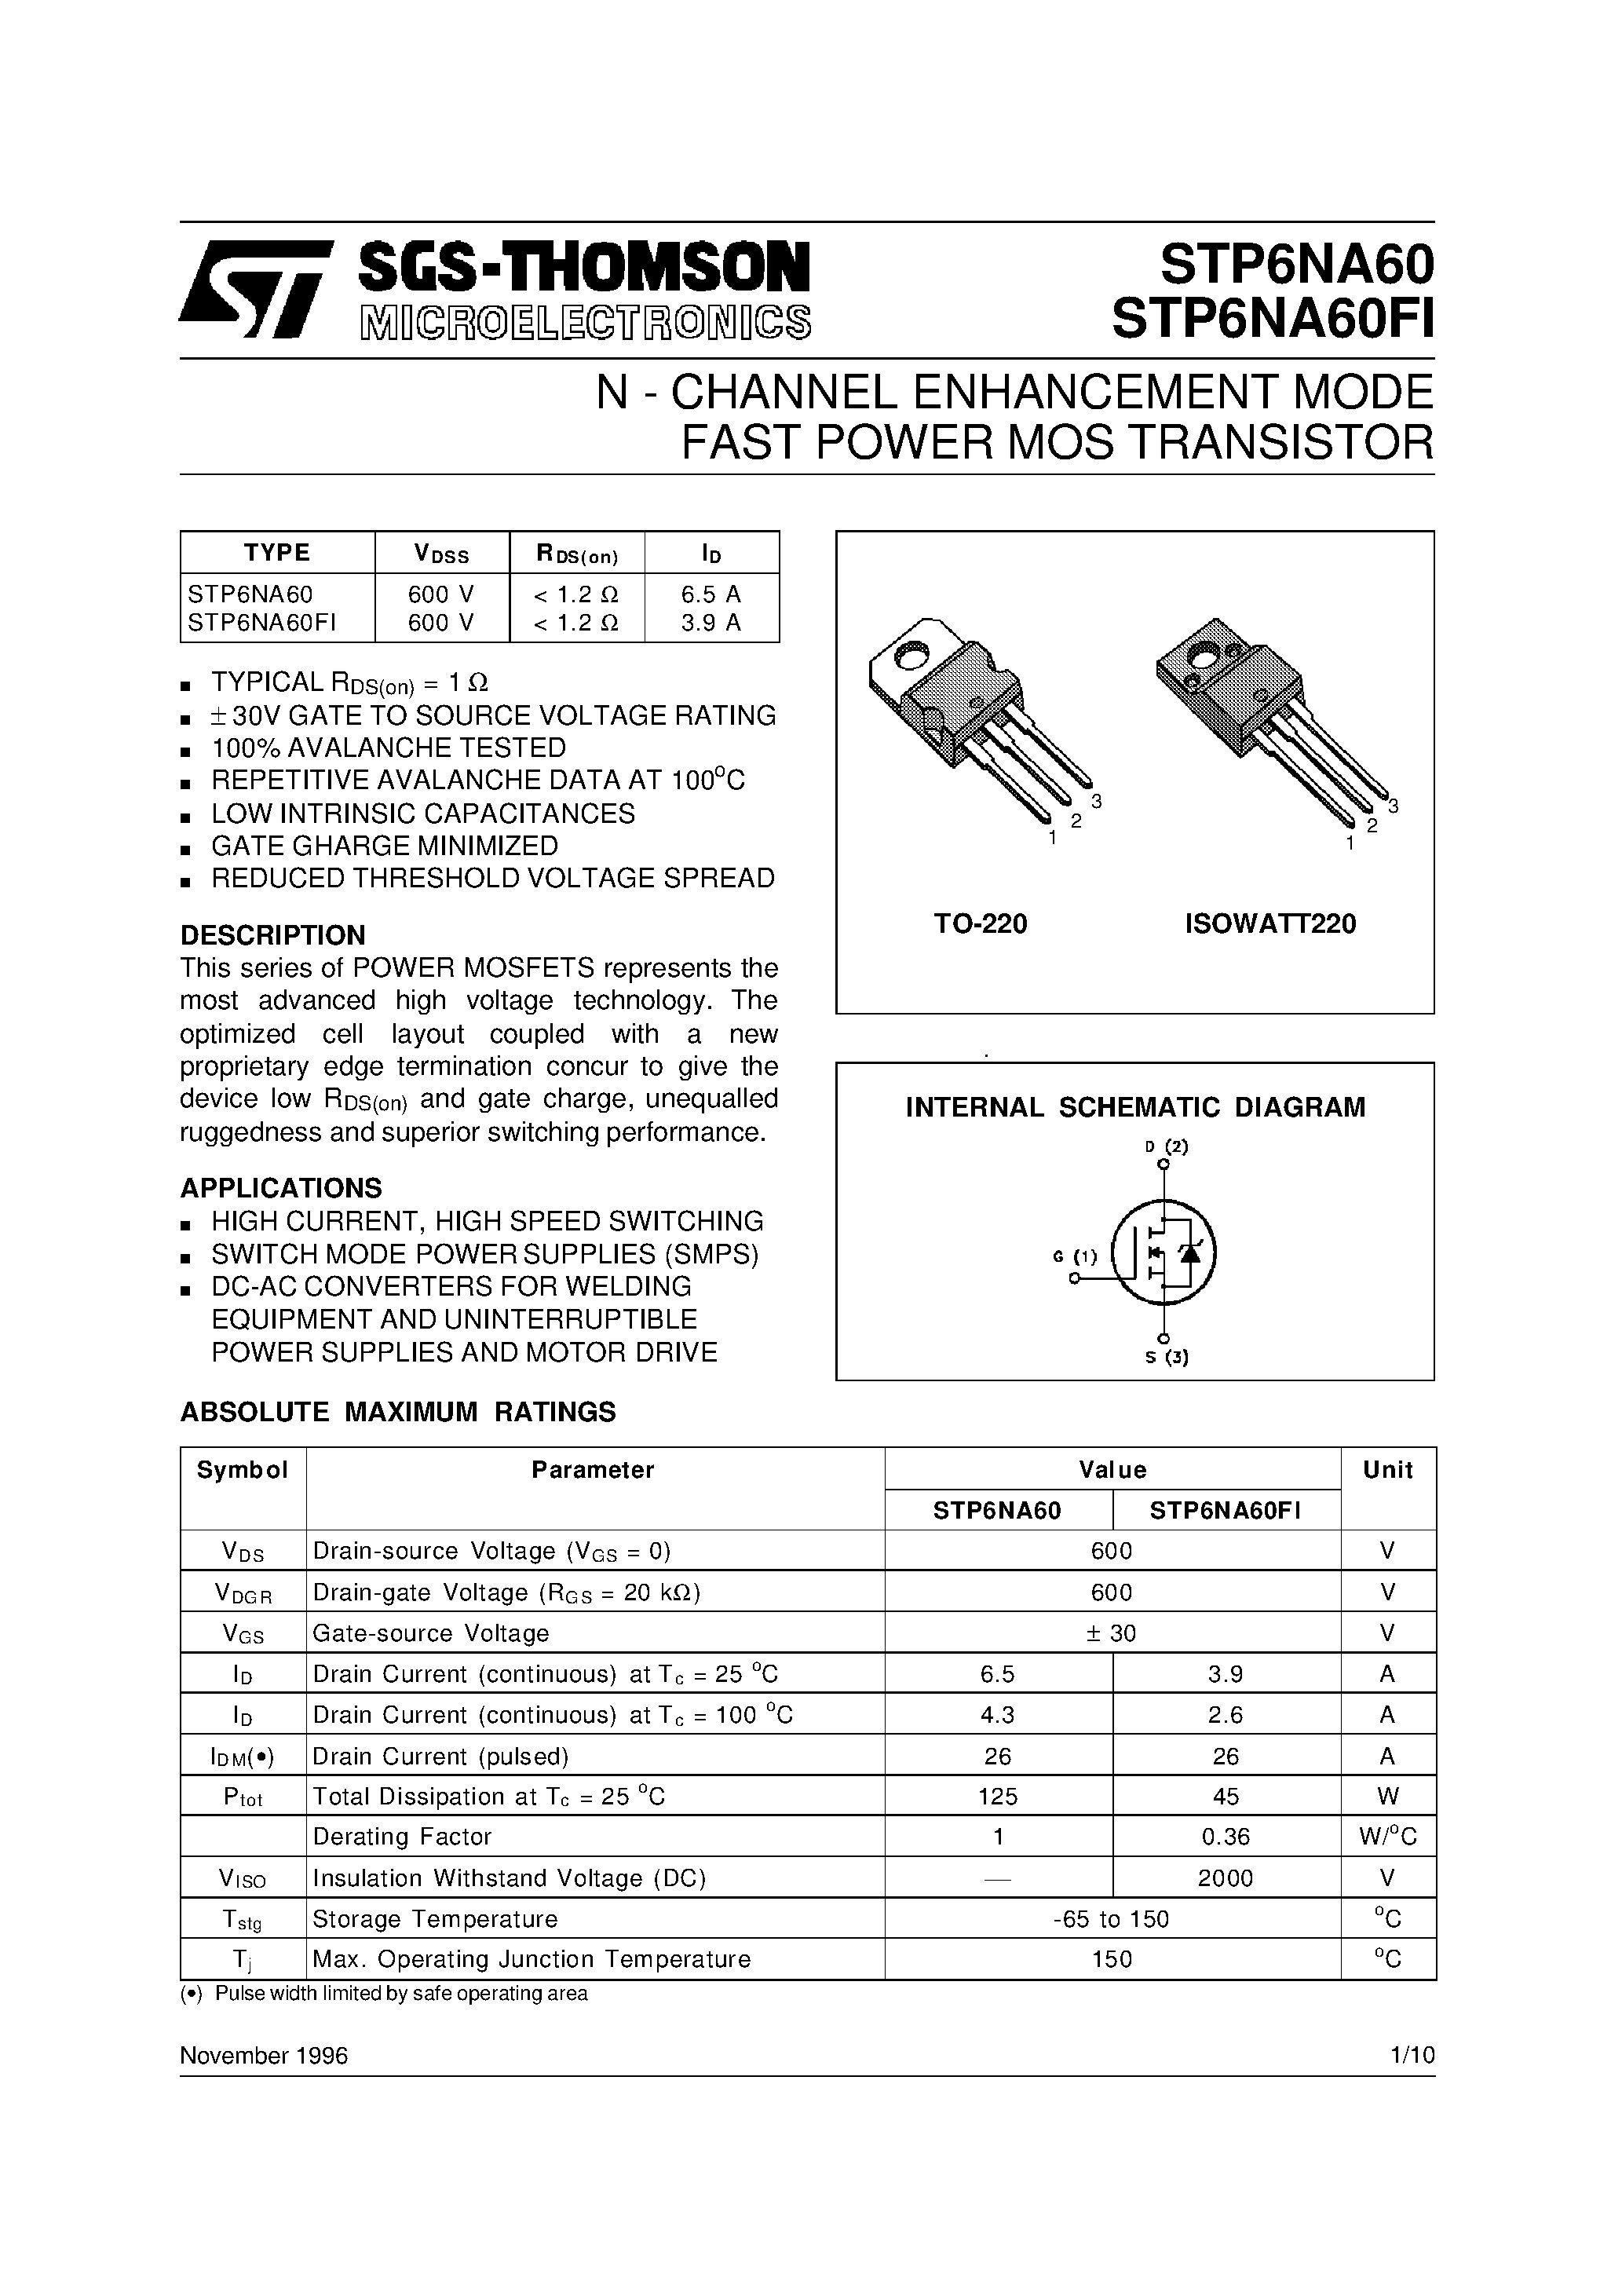 Datasheet STP6NA60 - N - CHANNEL ENHANCEMENT MODE FAST POWER MOS TRANSISTOR page 1